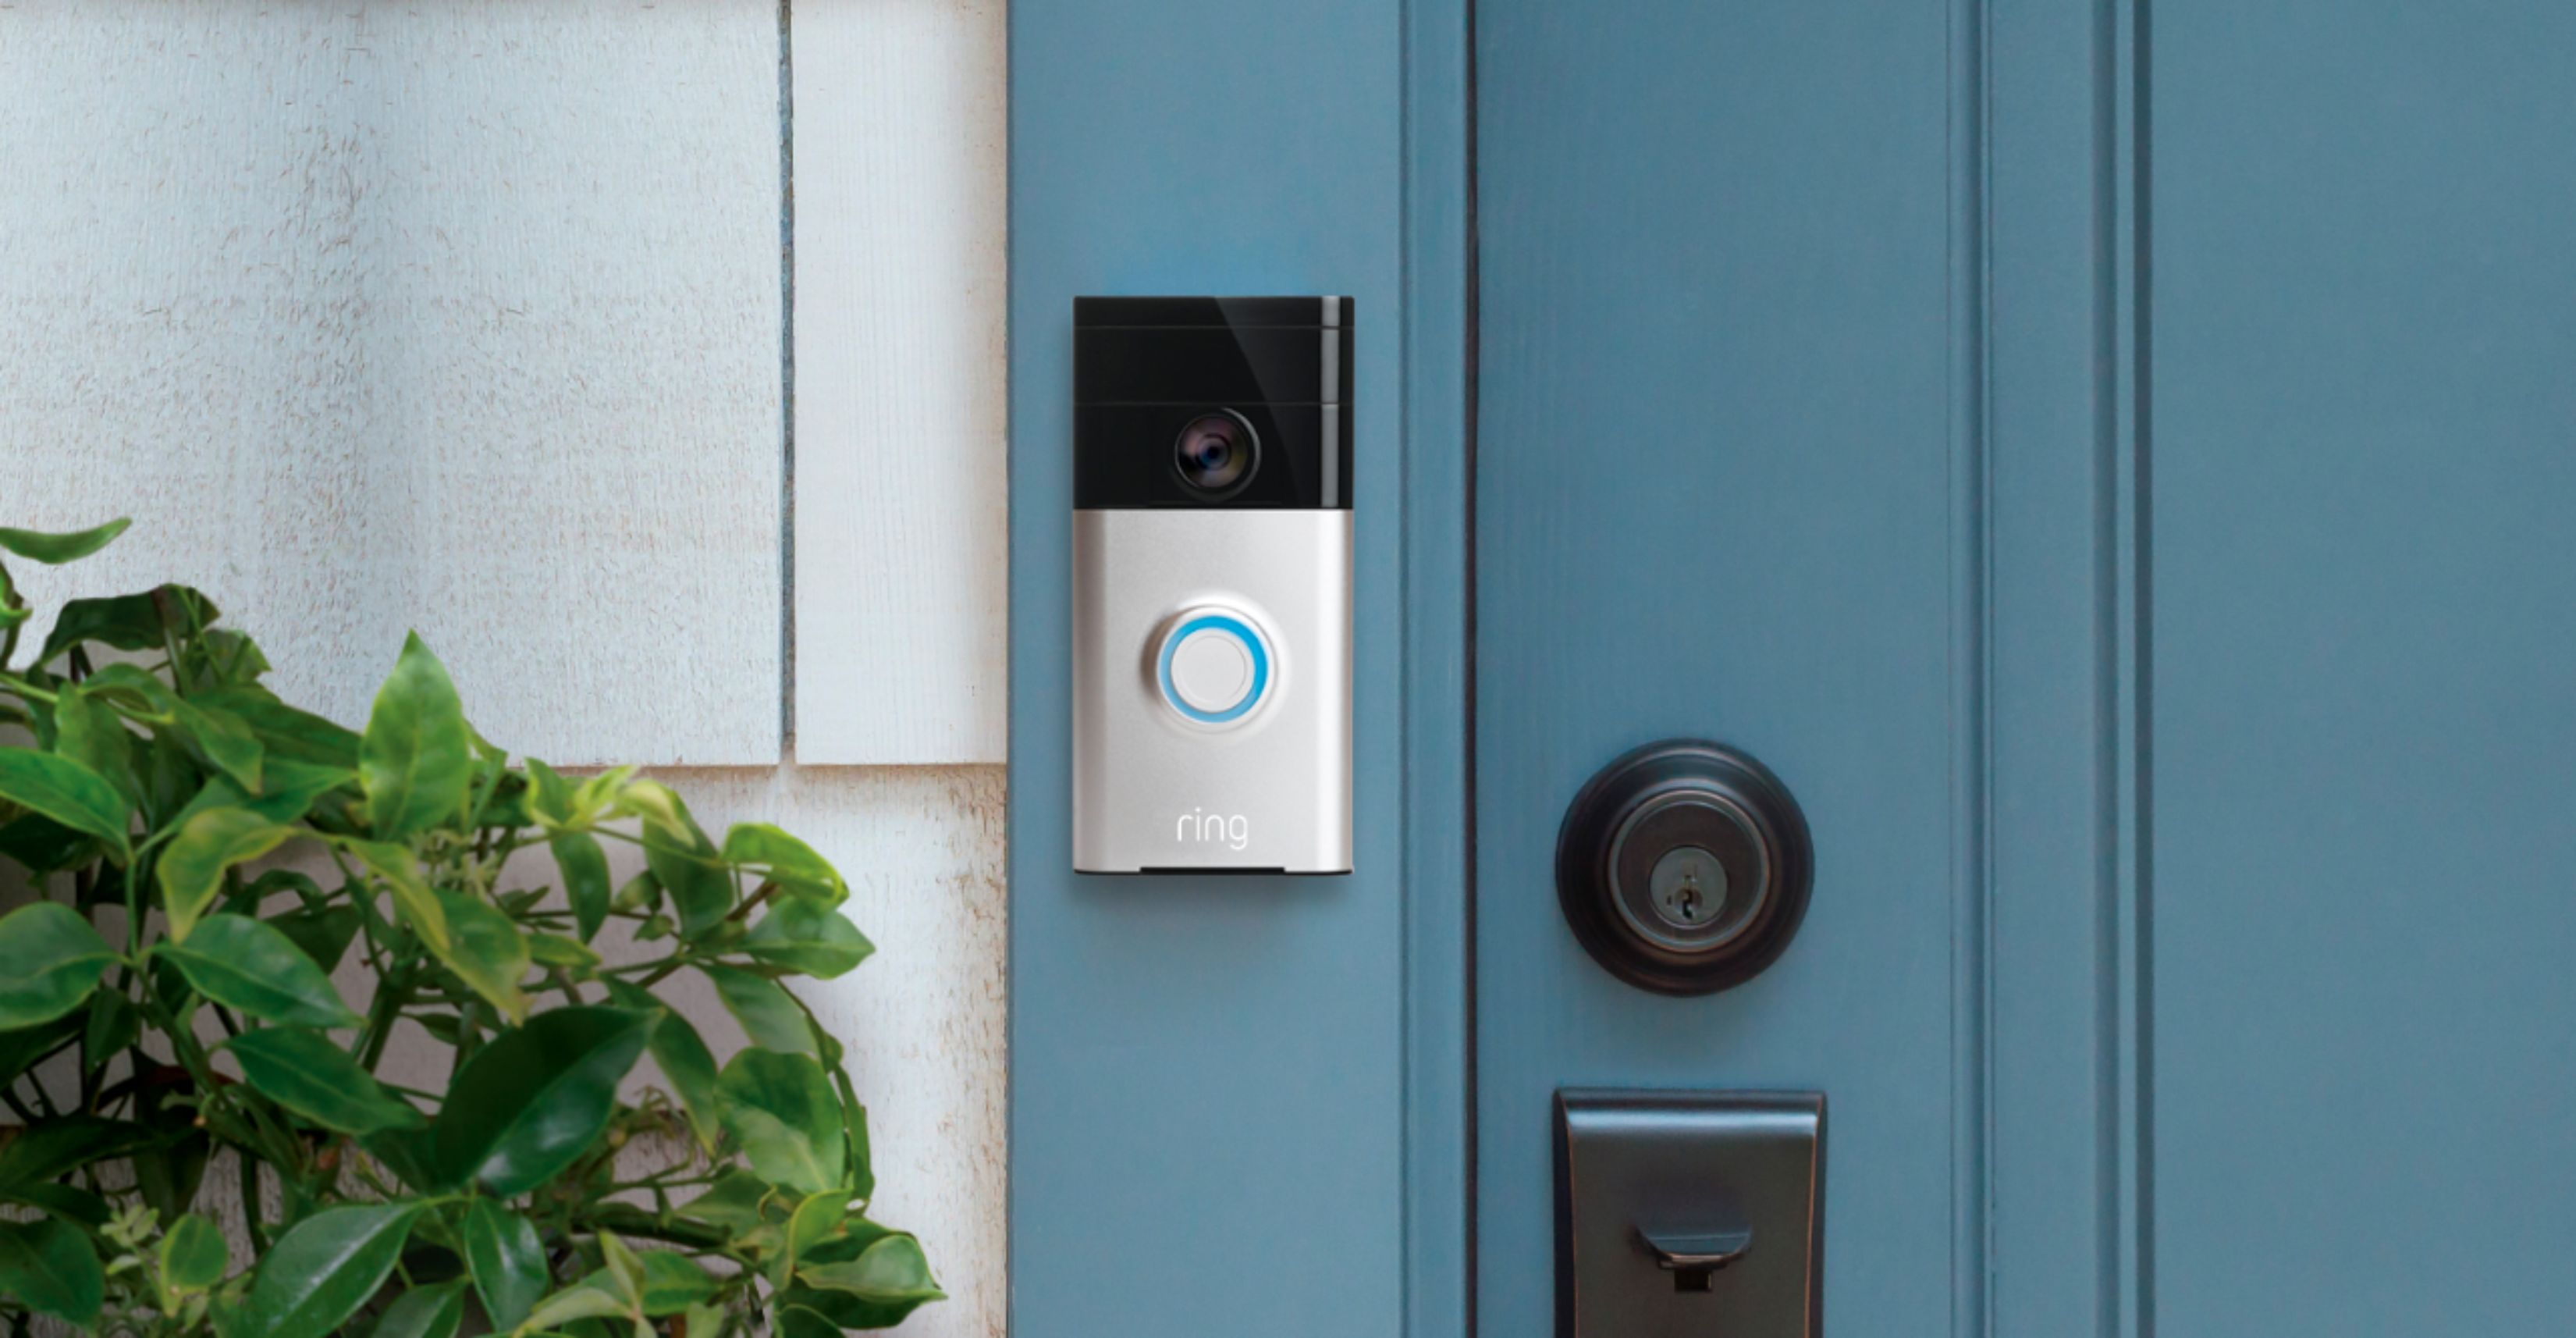 Amazon's Ring doorbell allows hackers to access WiFi InsideTechWorld